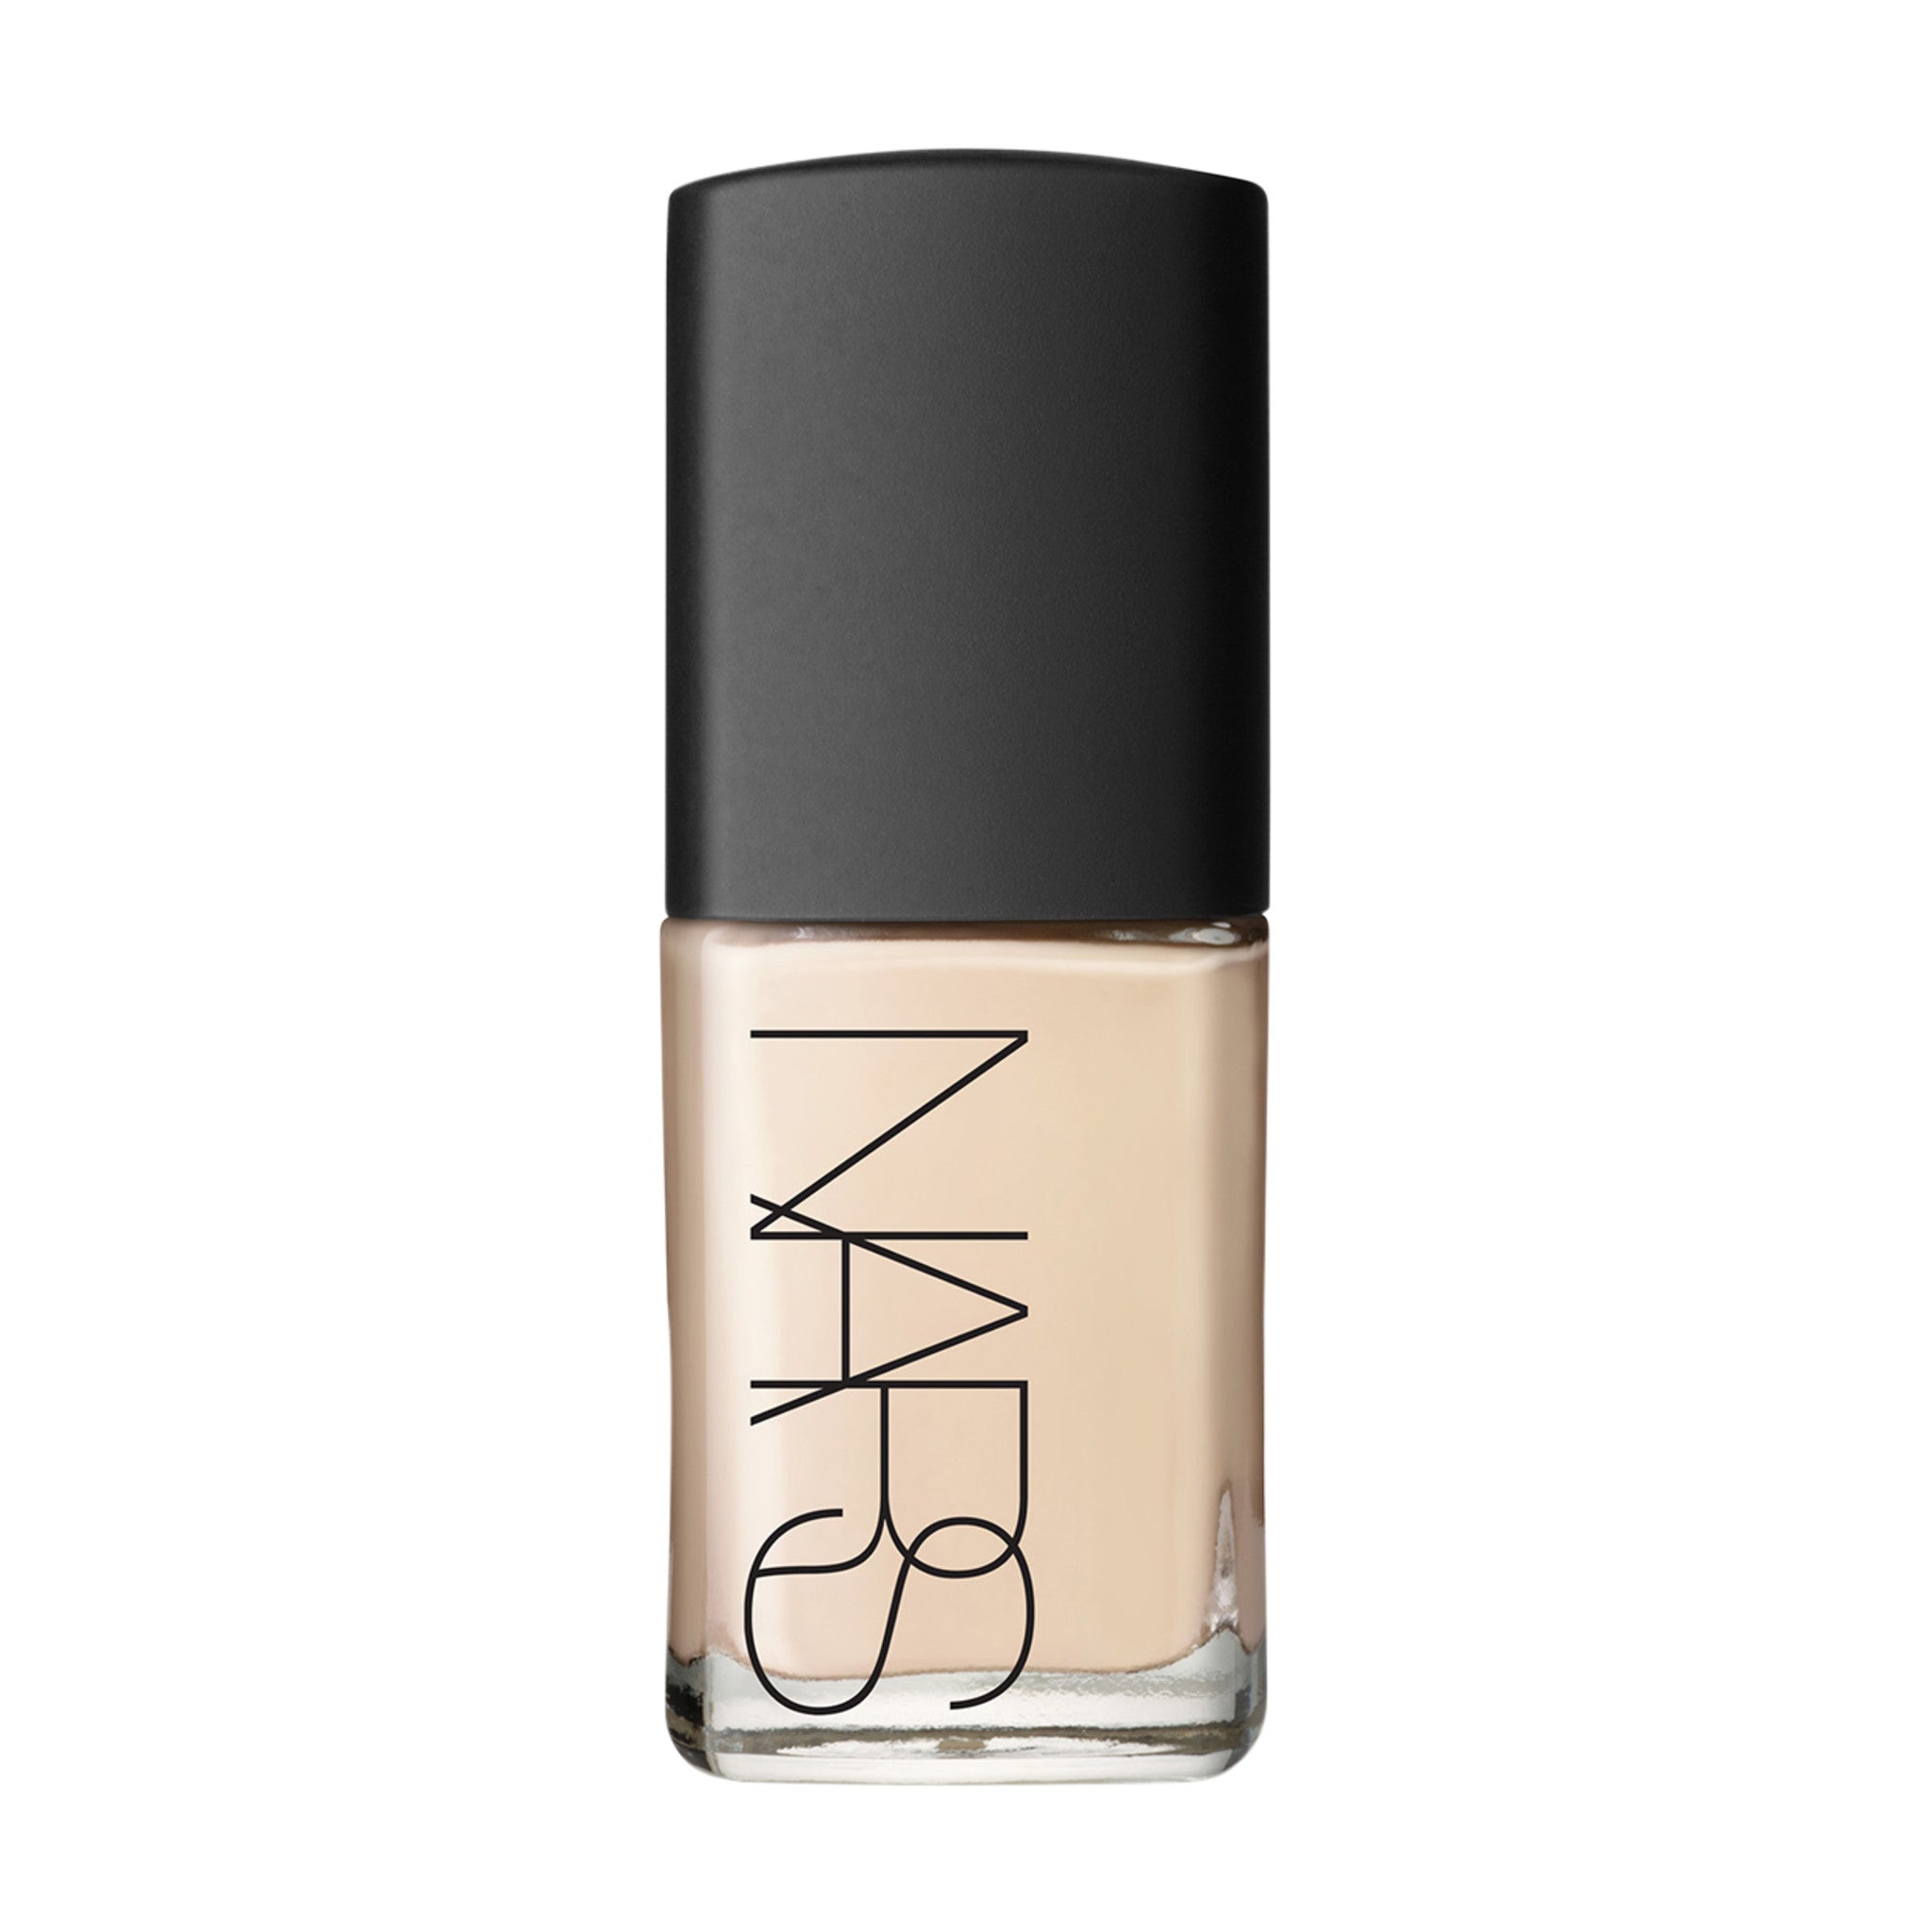 Nars Sheer Glow Foundation Color/Shade variant: Siberia L0 main image. This product is for light warm complexions